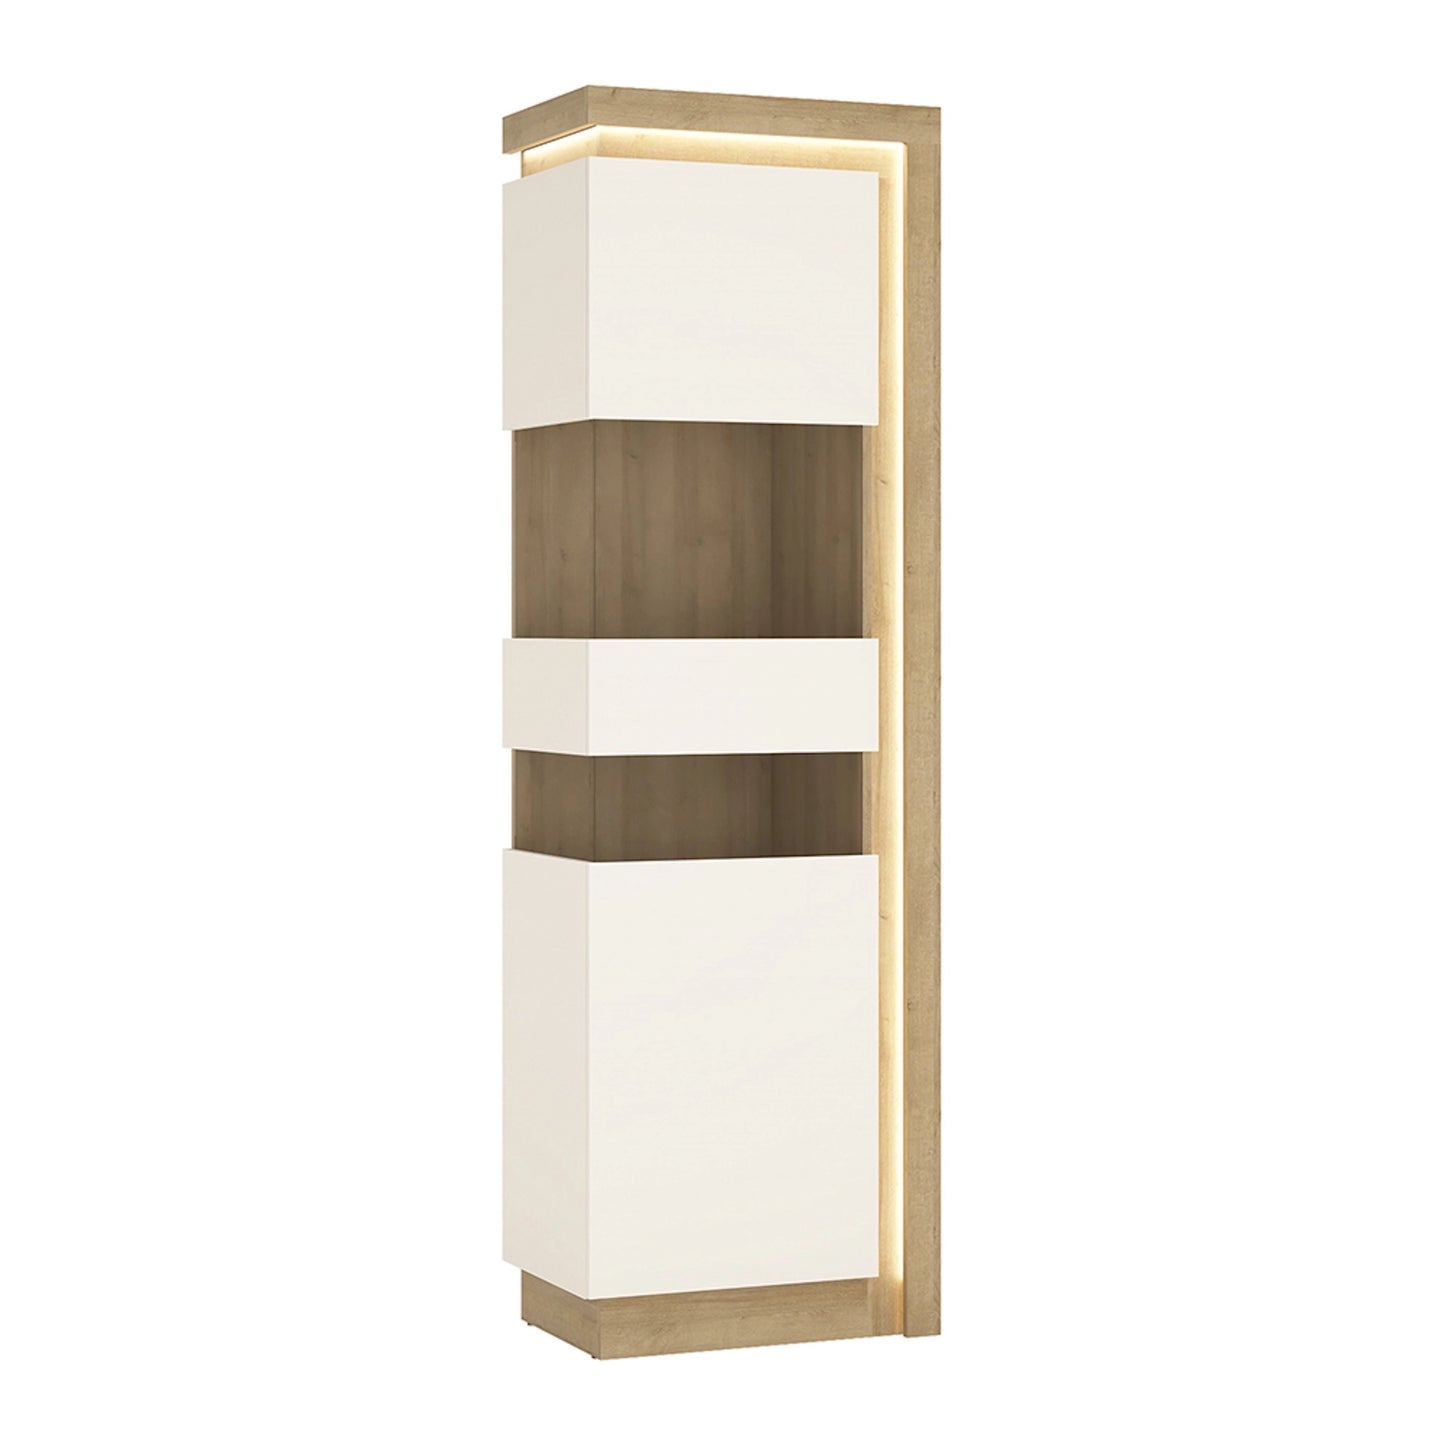 Furniture To Go Lyon Tall Narrow Display Cabinet (LHD) in Riviera Oak/White High Gloss